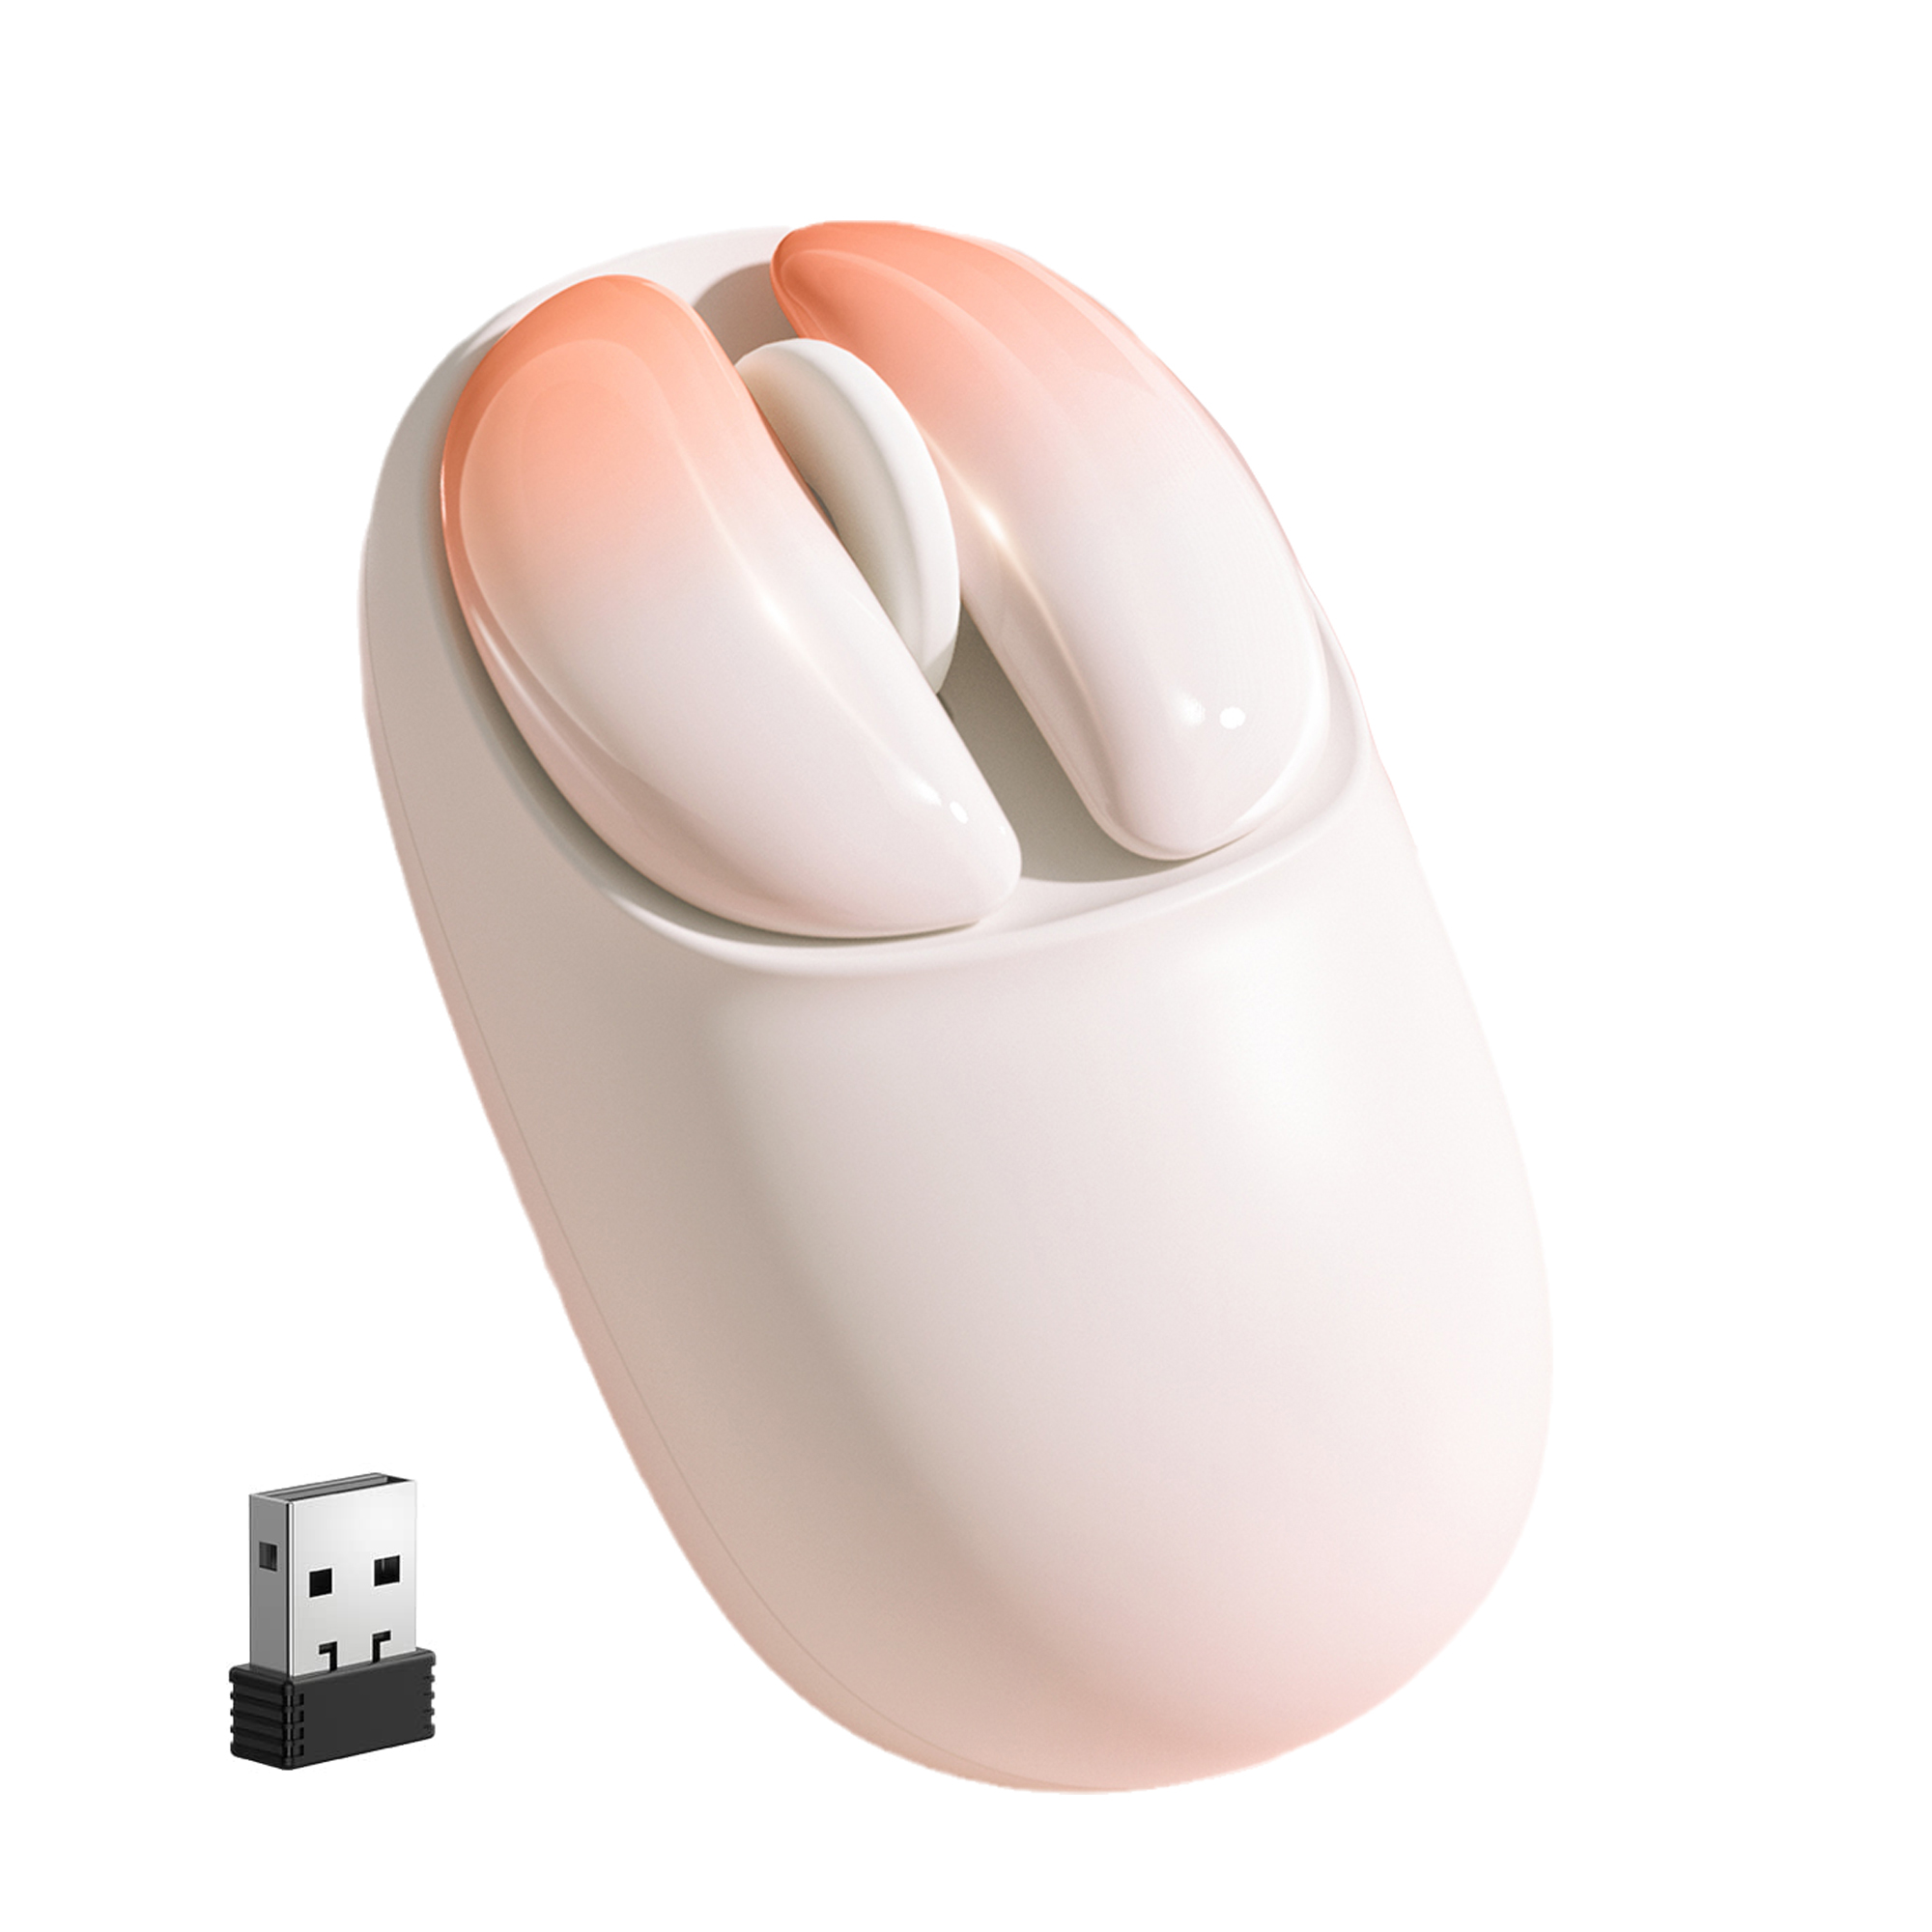 Pink Wireless Mouse Ergonomic, Silence Detachable Buttons, Rechargeable Cute USB C Design for Left/R